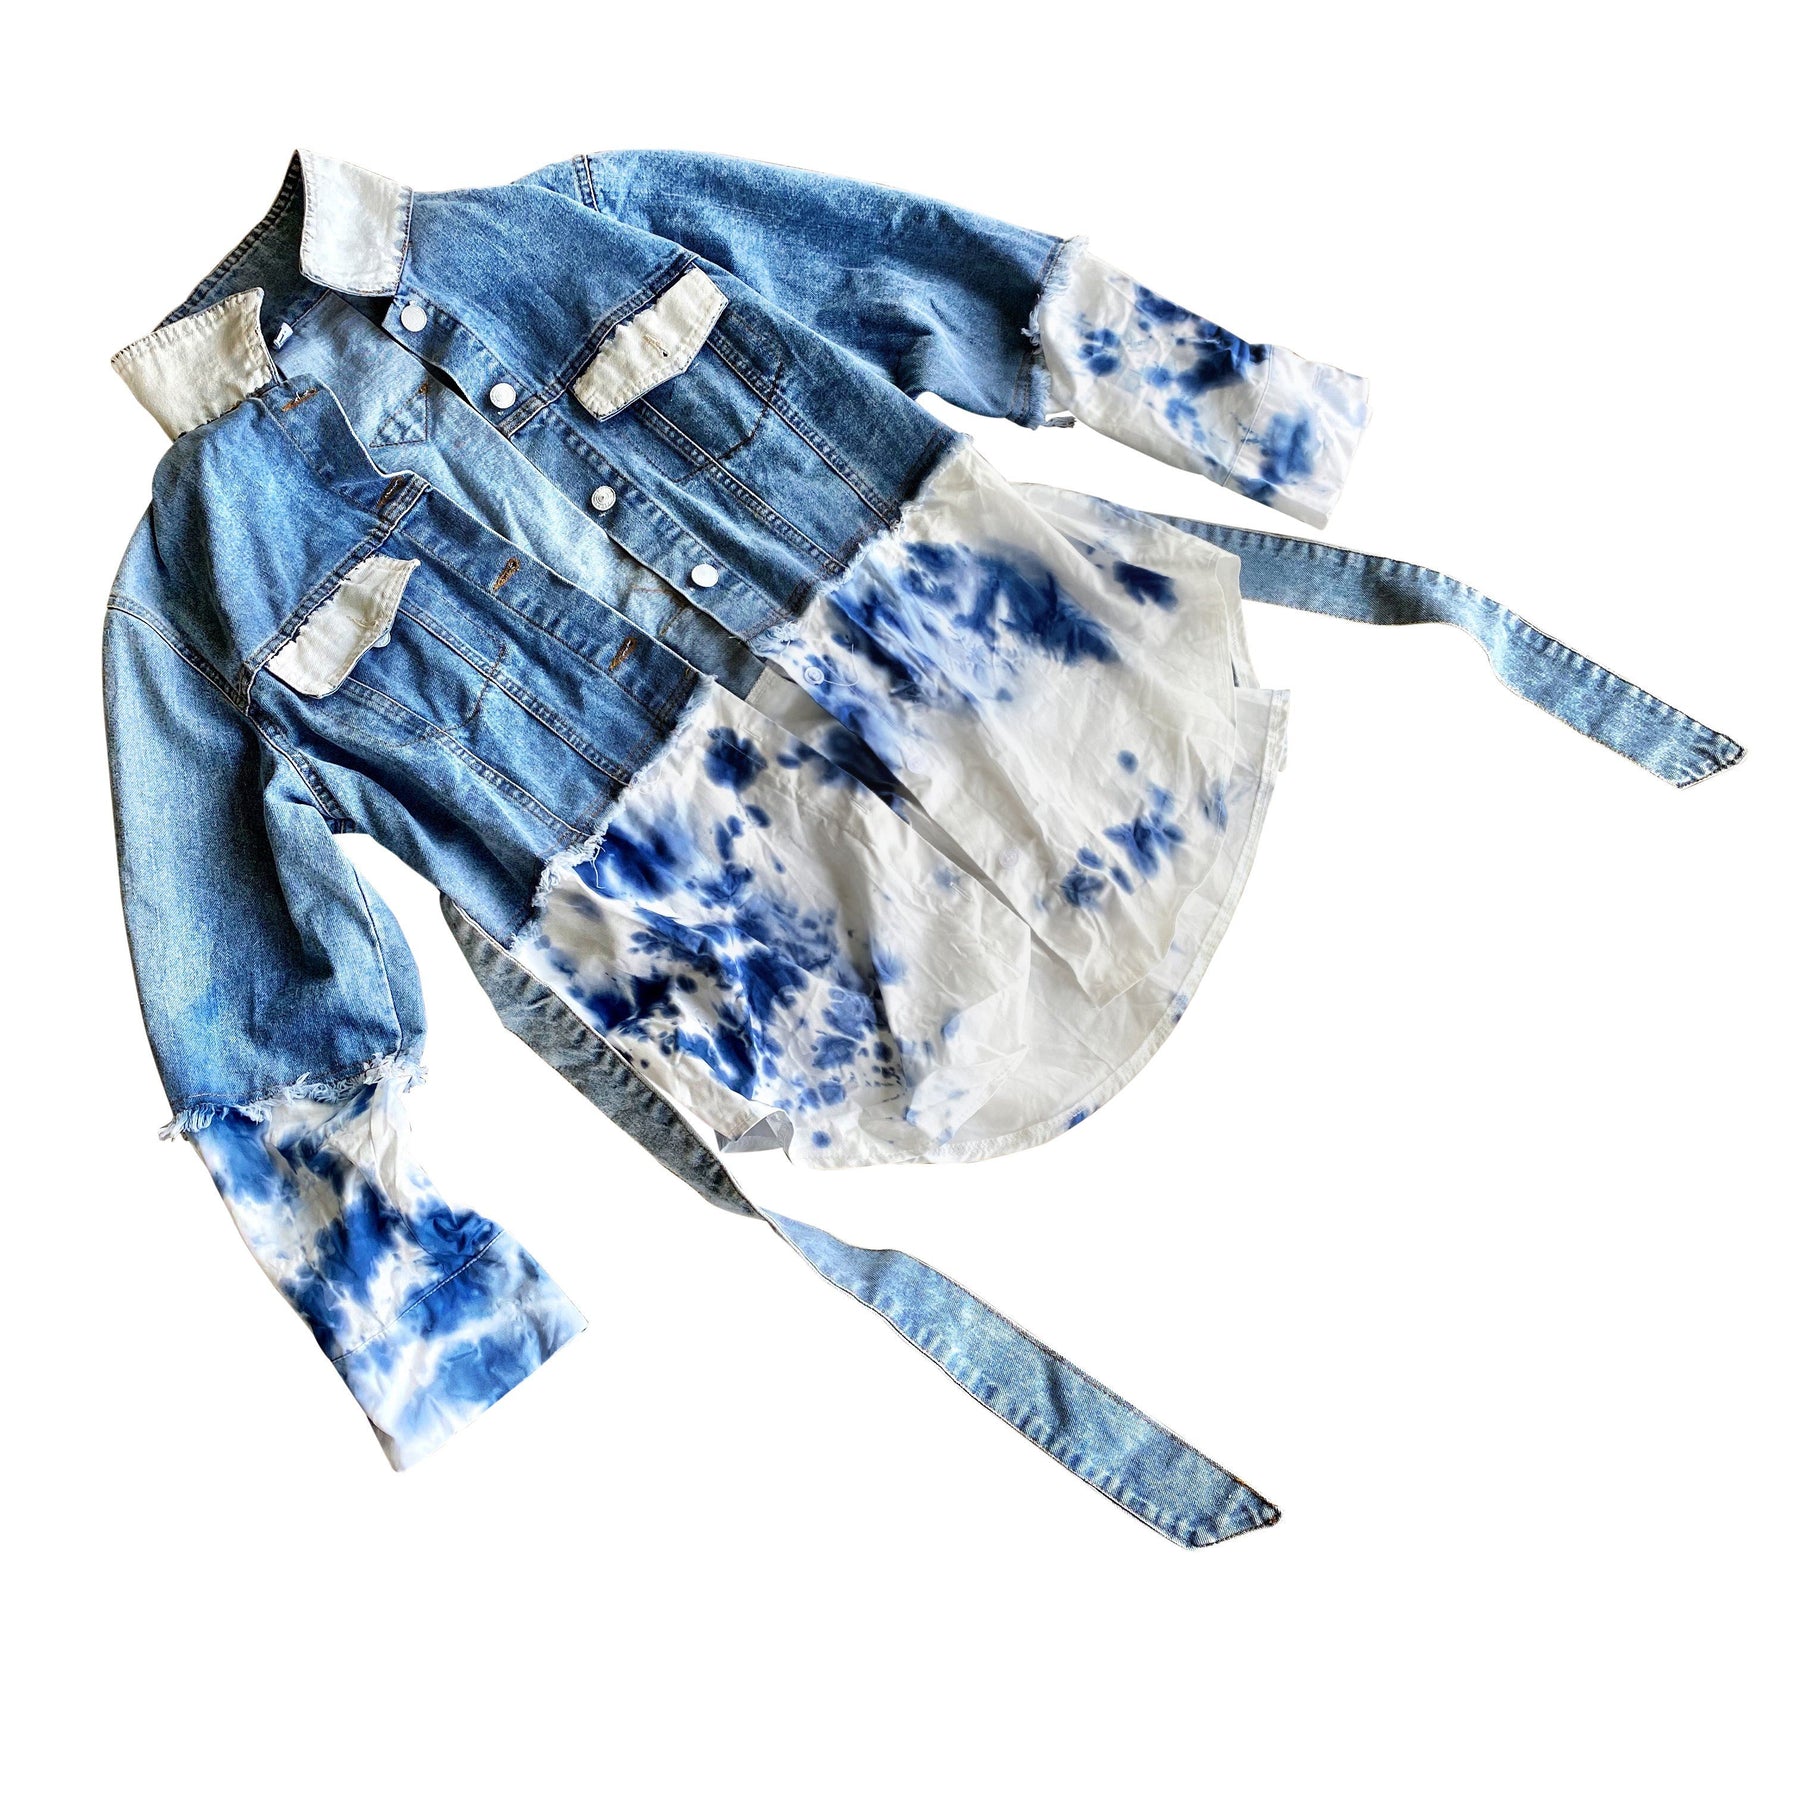 Blue denim, with white cotton along bottom half and bottom of sleeves. Blue tie dye pattern on white portion. Collar and front pockets painted white. Signed @wrenandglory.